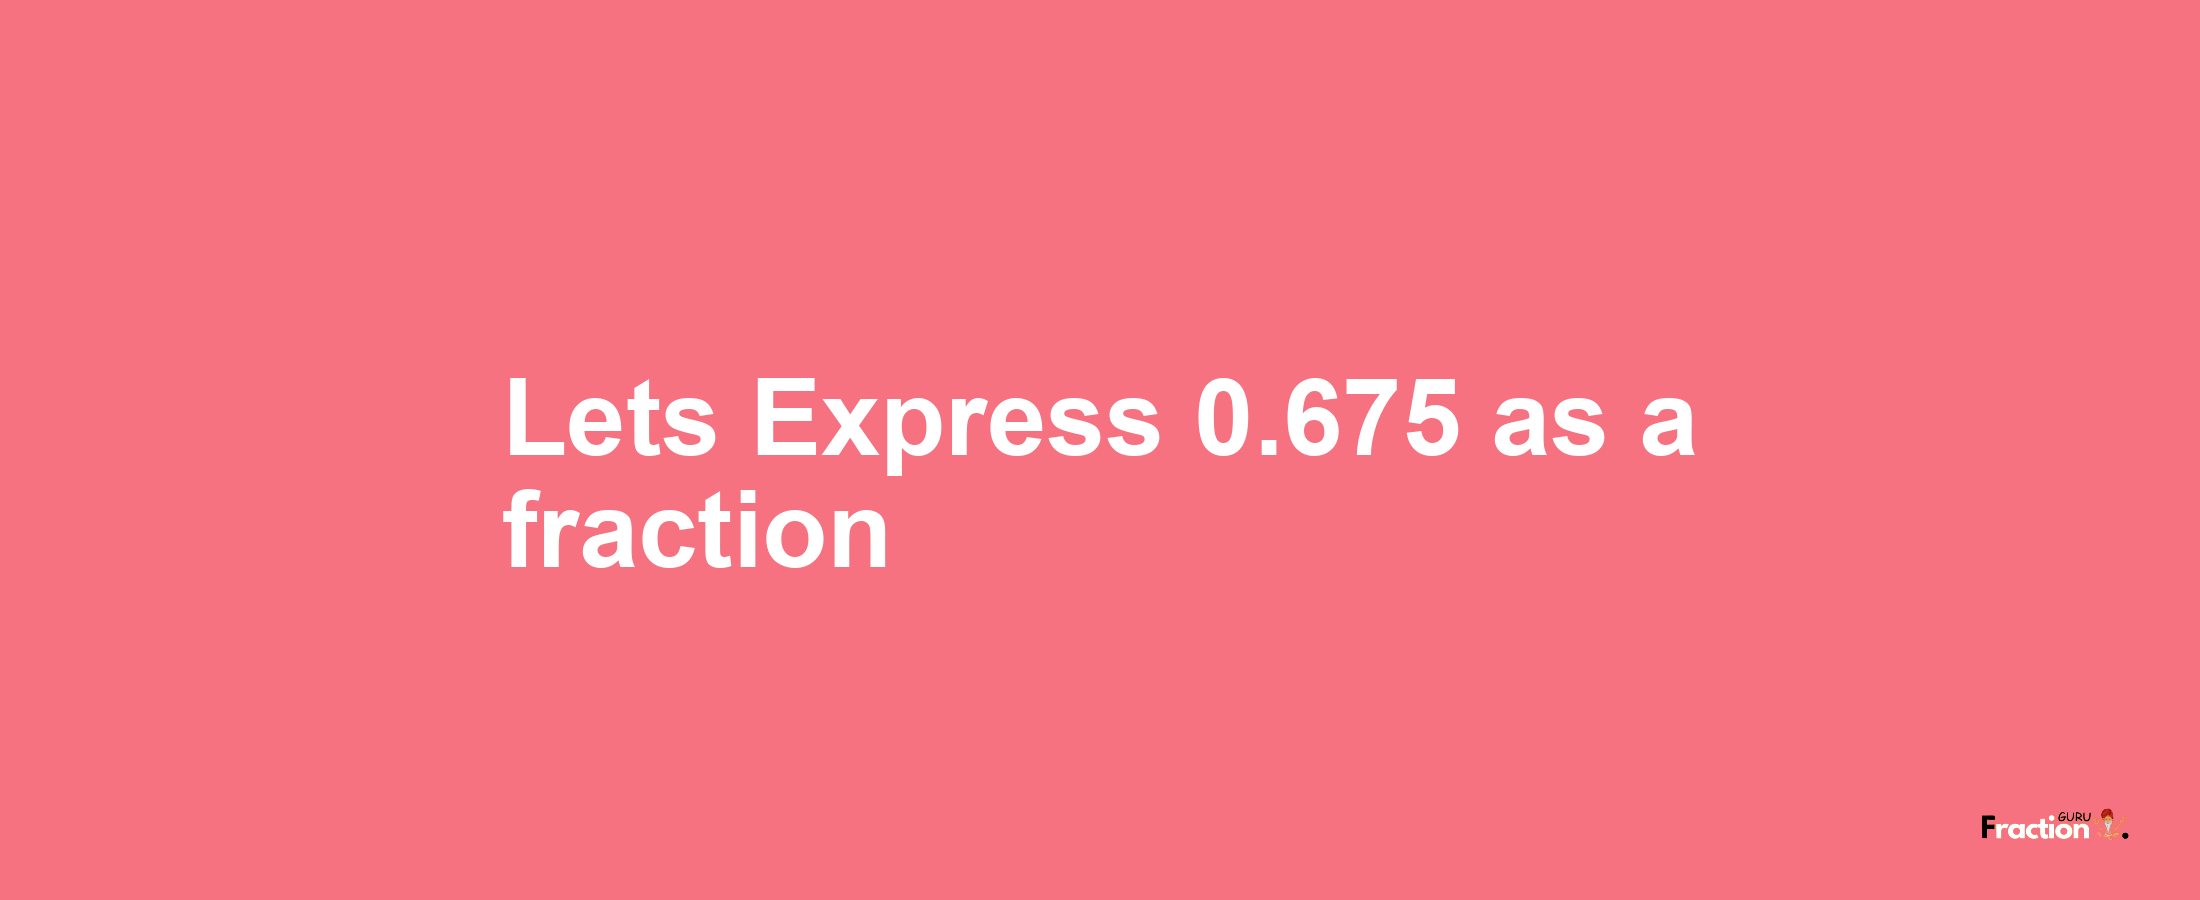 Lets Express 0.675 as afraction